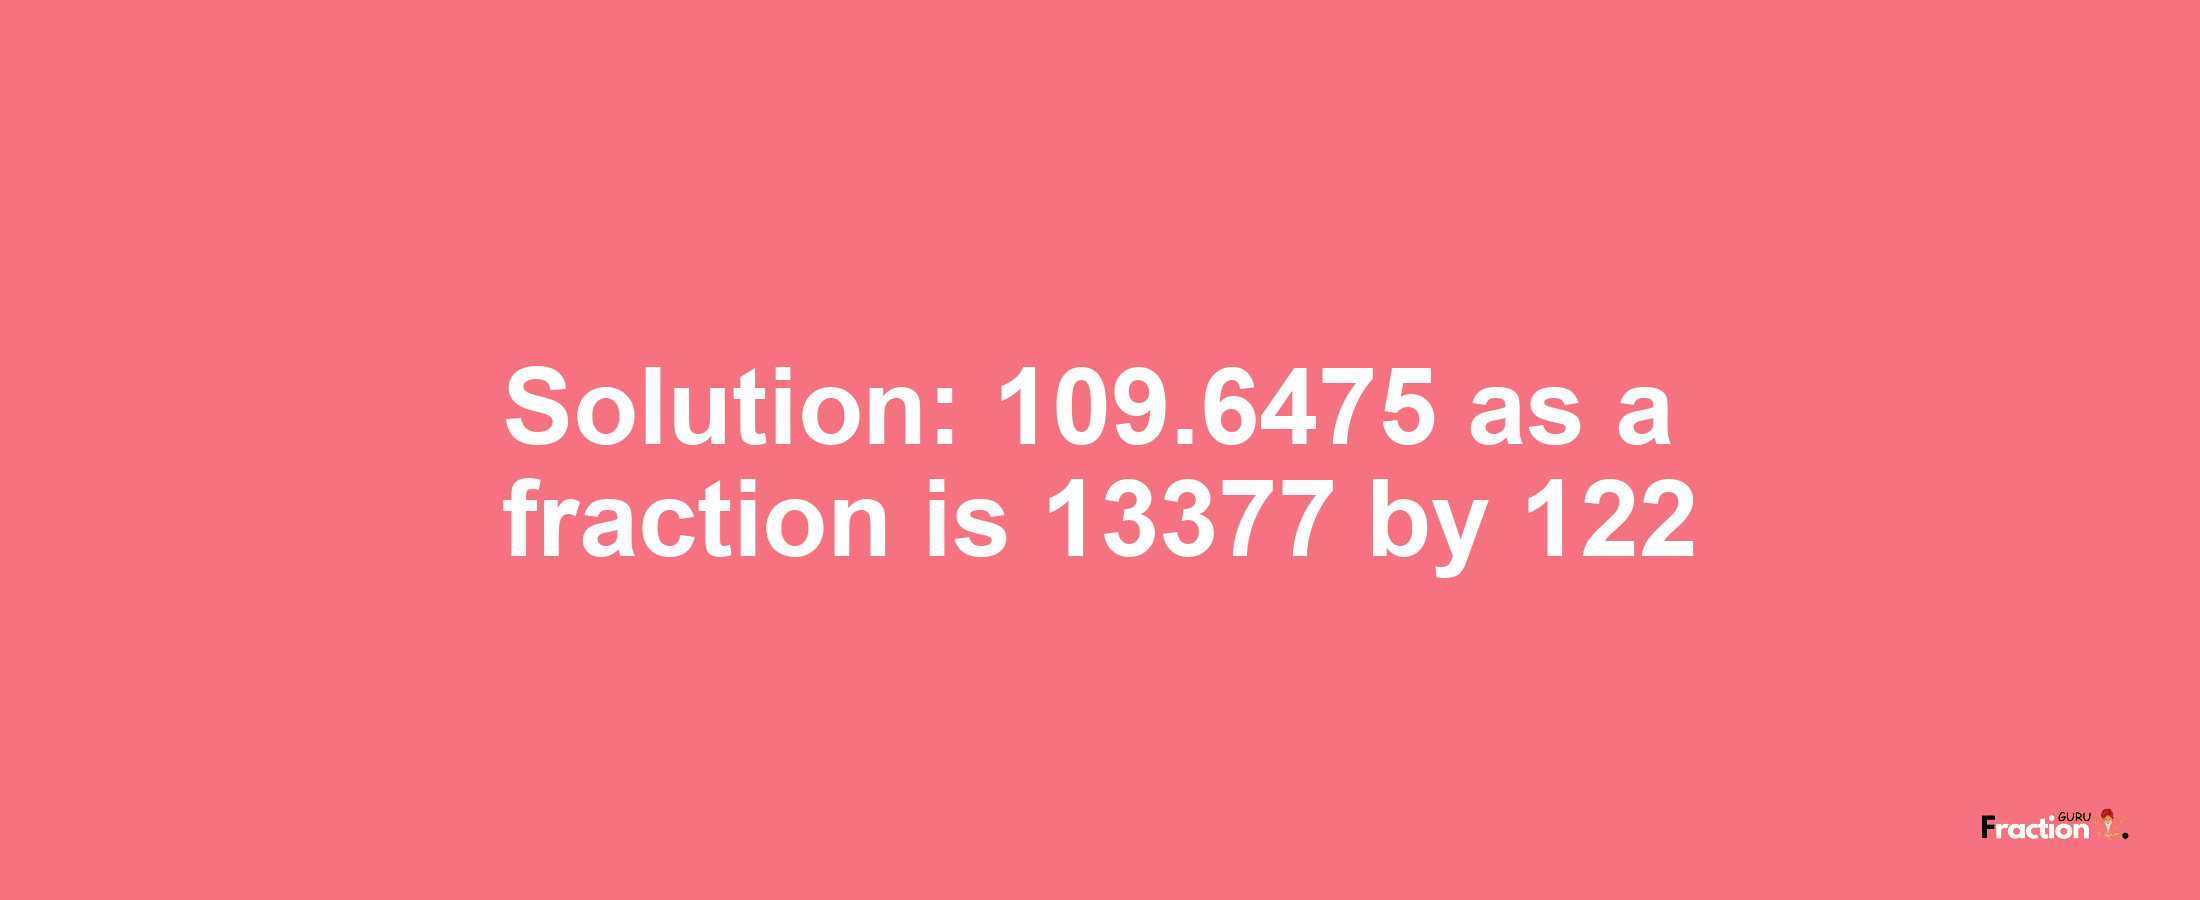 Solution:109.6475 as a fraction is 13377/122